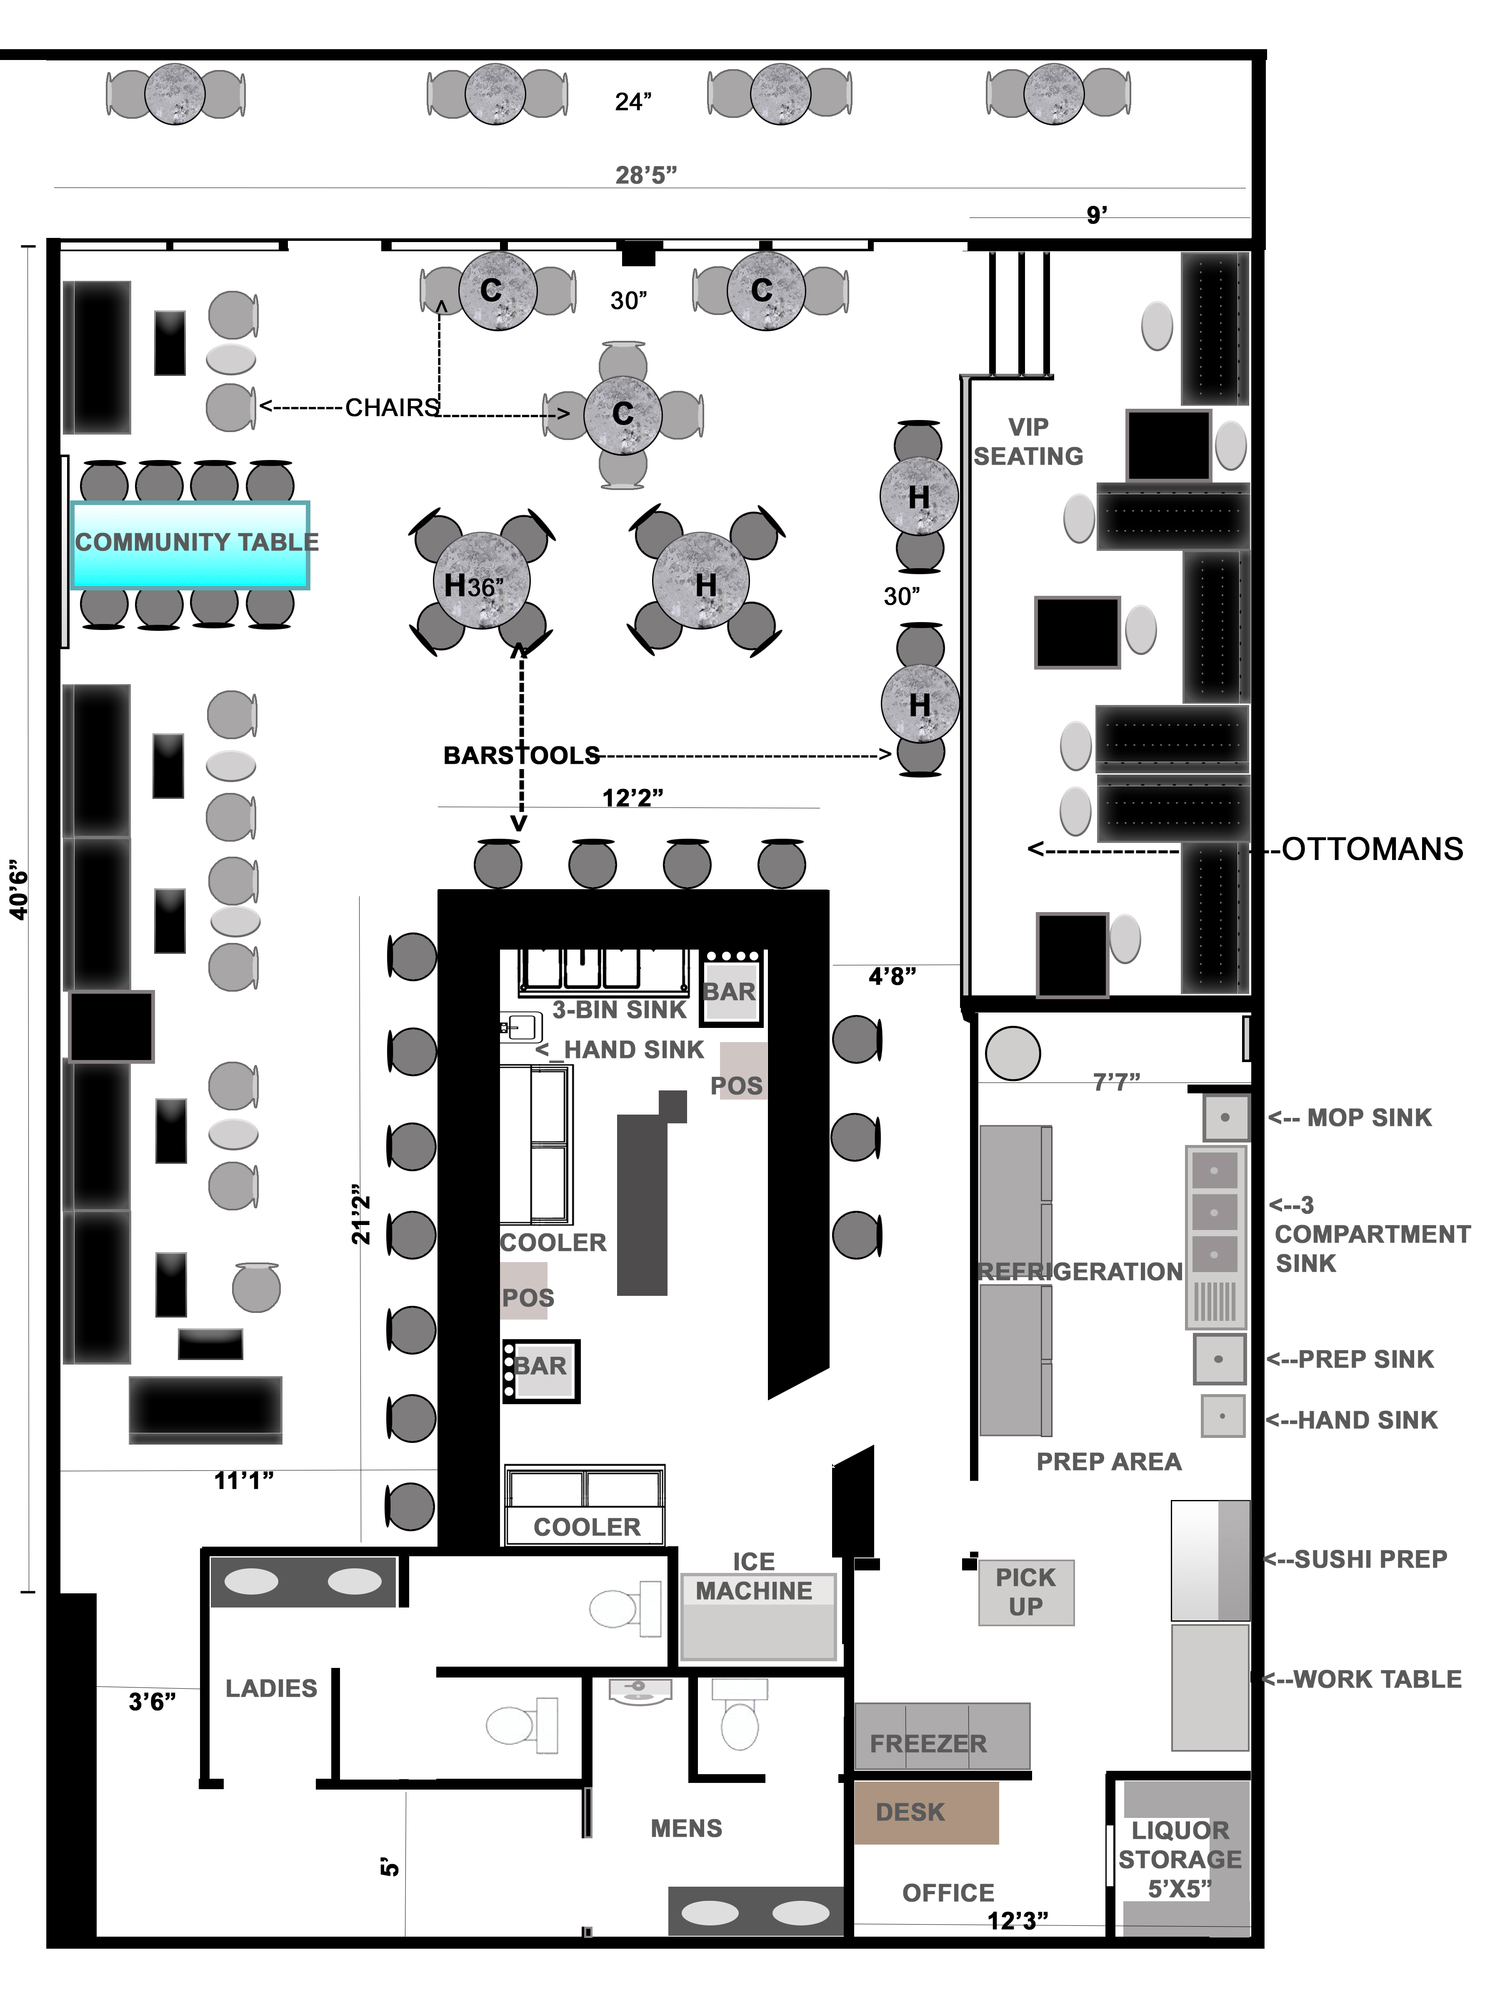 How To Design A Restaurant Floor Plan 10 Restaurant Layouts To Inspire You On The Line Toast Pos